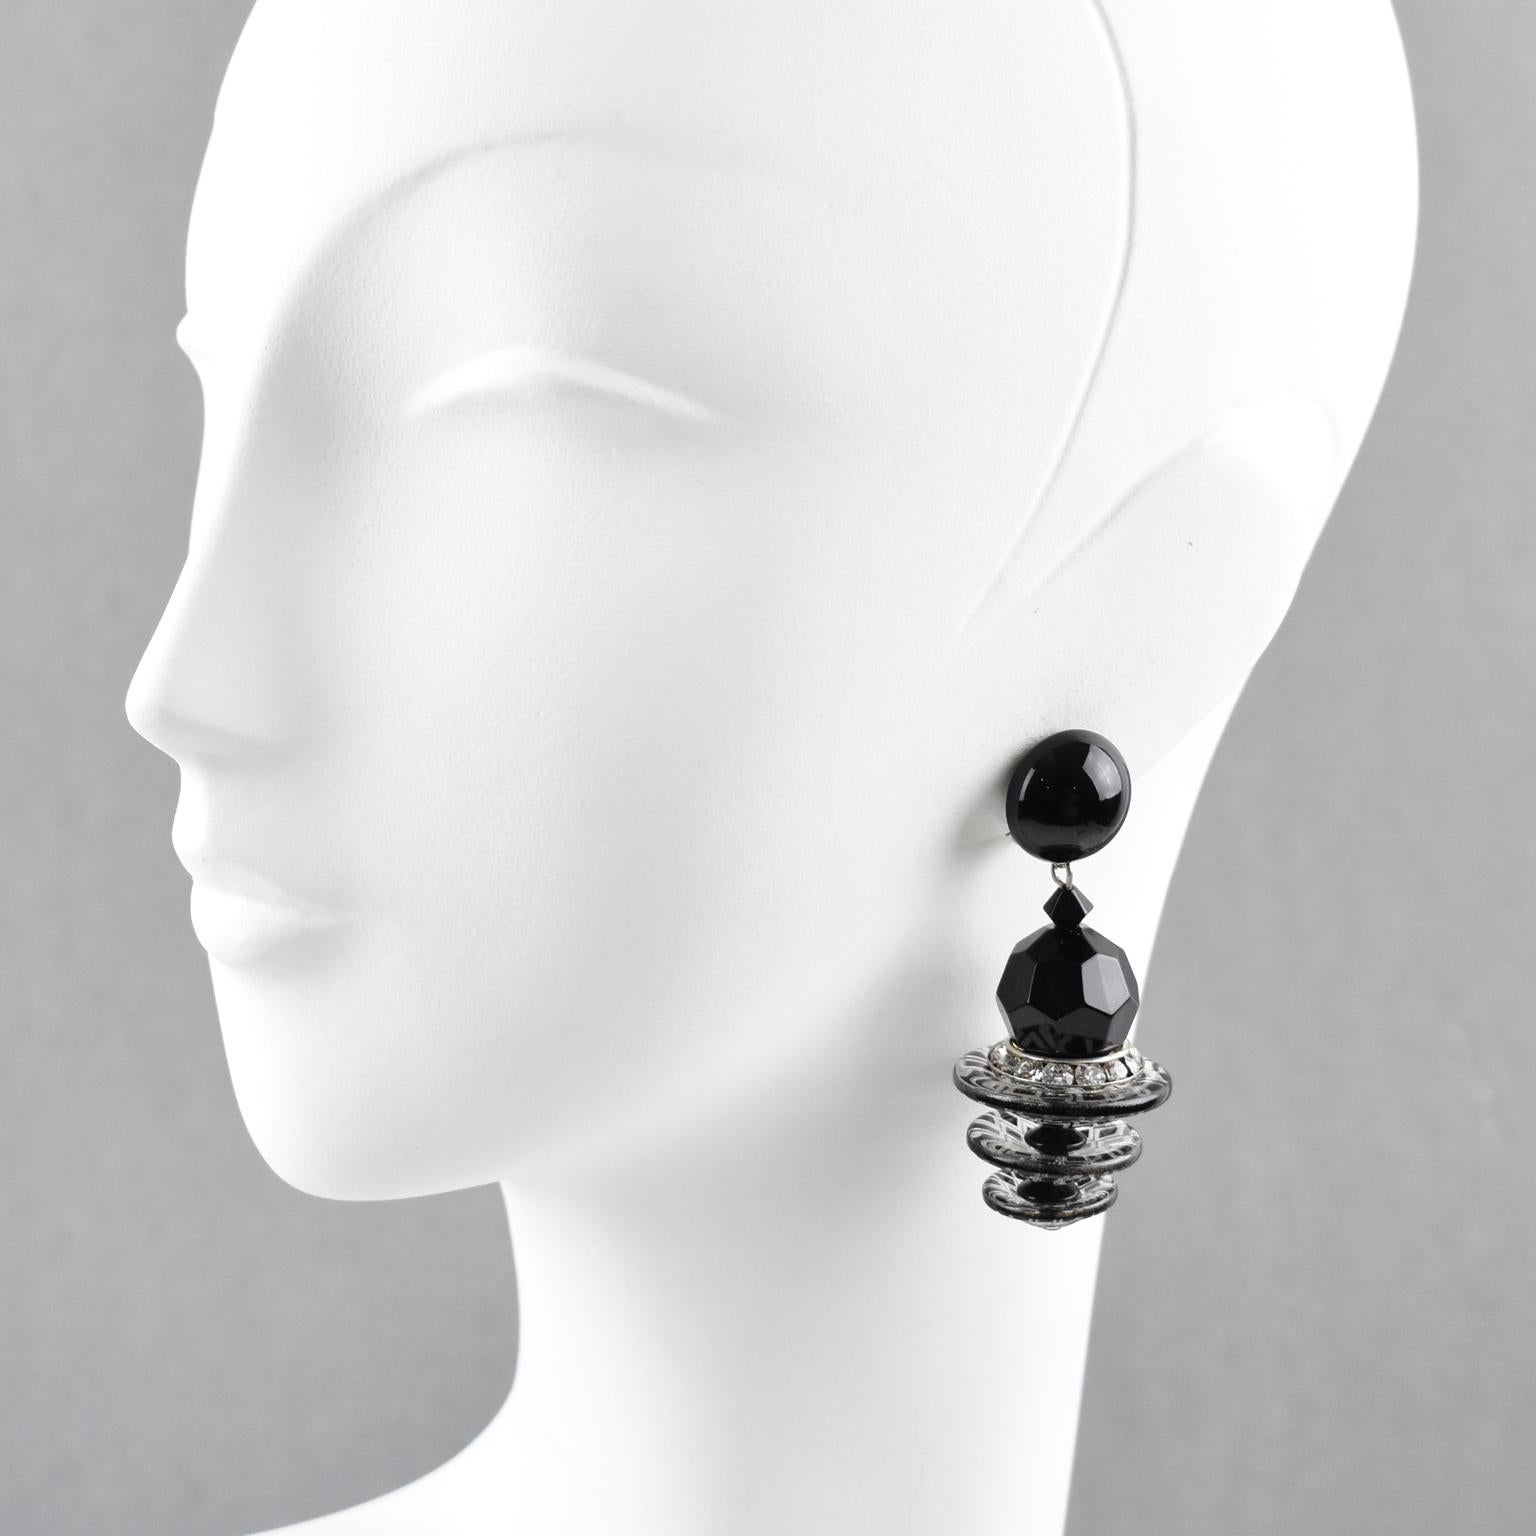 Stunning Angela Caputi, made in Italy resin clip-on earrings. Oversized dangling design with black elements in a cascading shape, contrasted with clear beads with black carving and clear crystal rhinestones ring. Her matching of colors is always